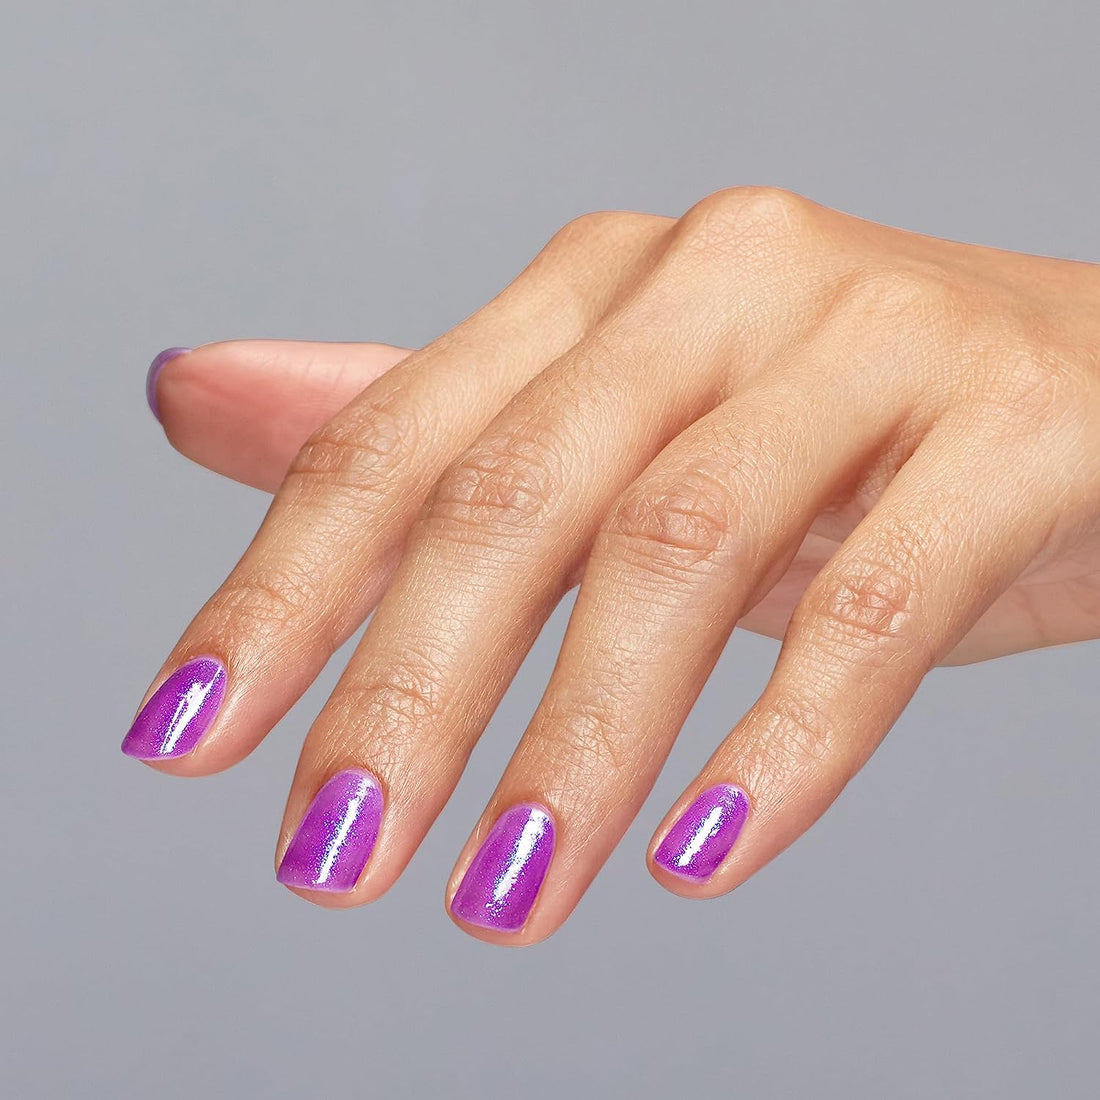 OPI Infinite Shine Nail Lacquer Feelin' Libra-ted ISLH020 Violet Shimmer Big Zodiac Energy Collection Fall 2023